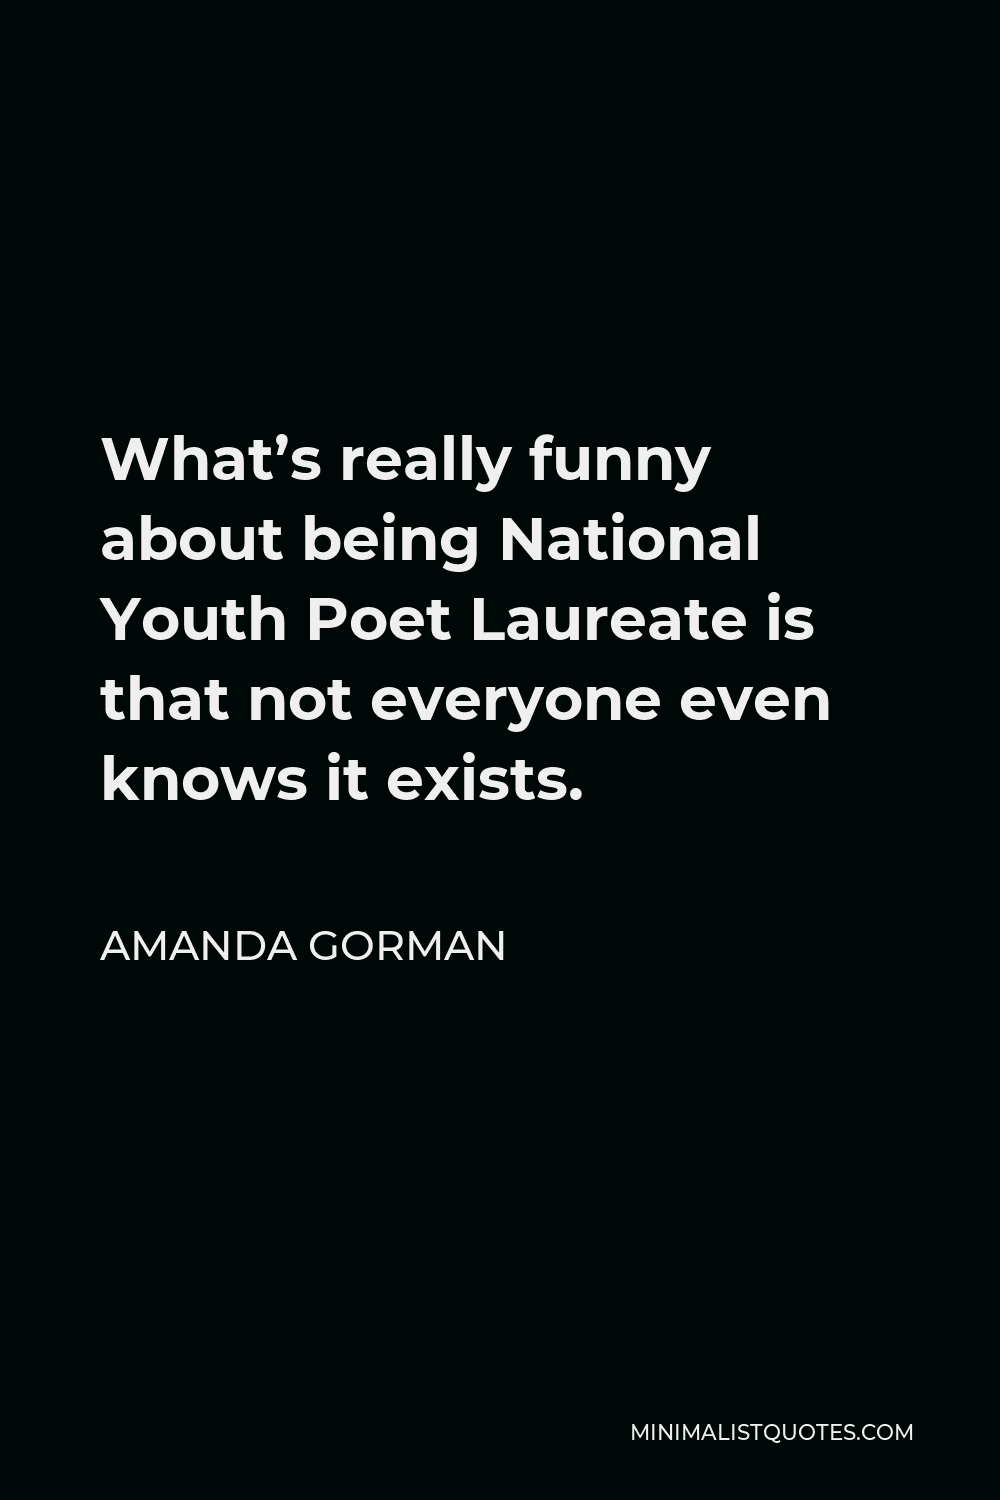 Amanda Gorman Quote - What’s really funny about being National Youth Poet Laureate is that not everyone even knows it exists.